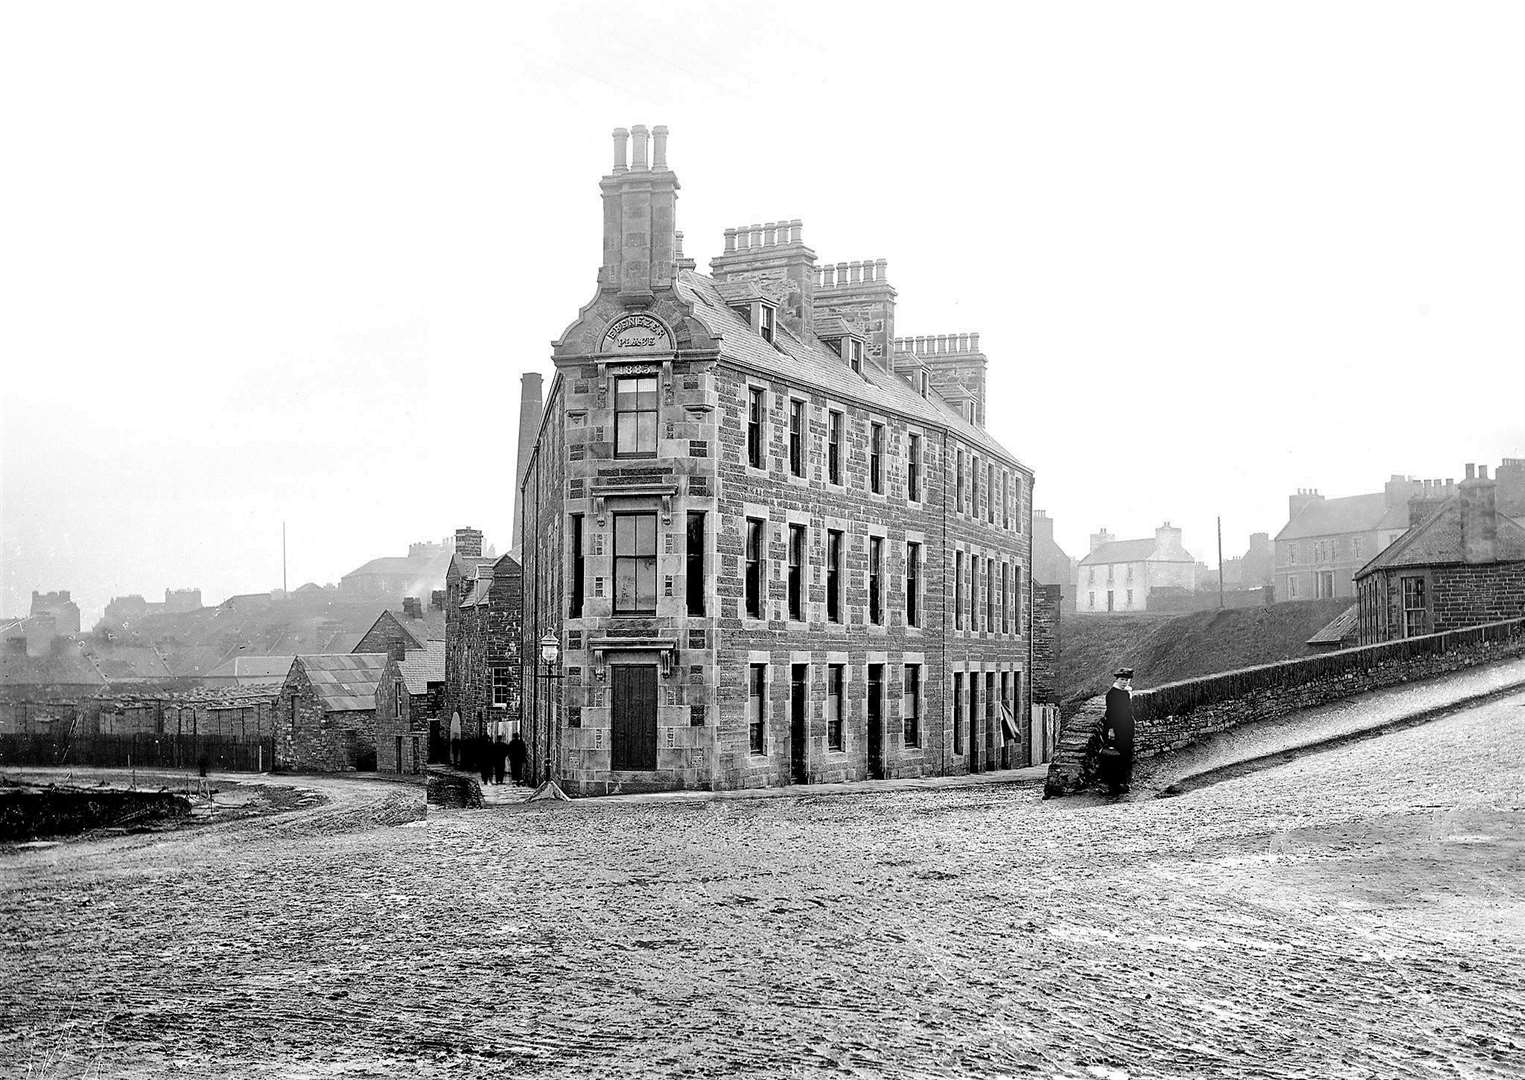 Mackays Hotel pictured just after it was built in 1883 and showing the world's shortest street, Ebenezer Place, at the front.